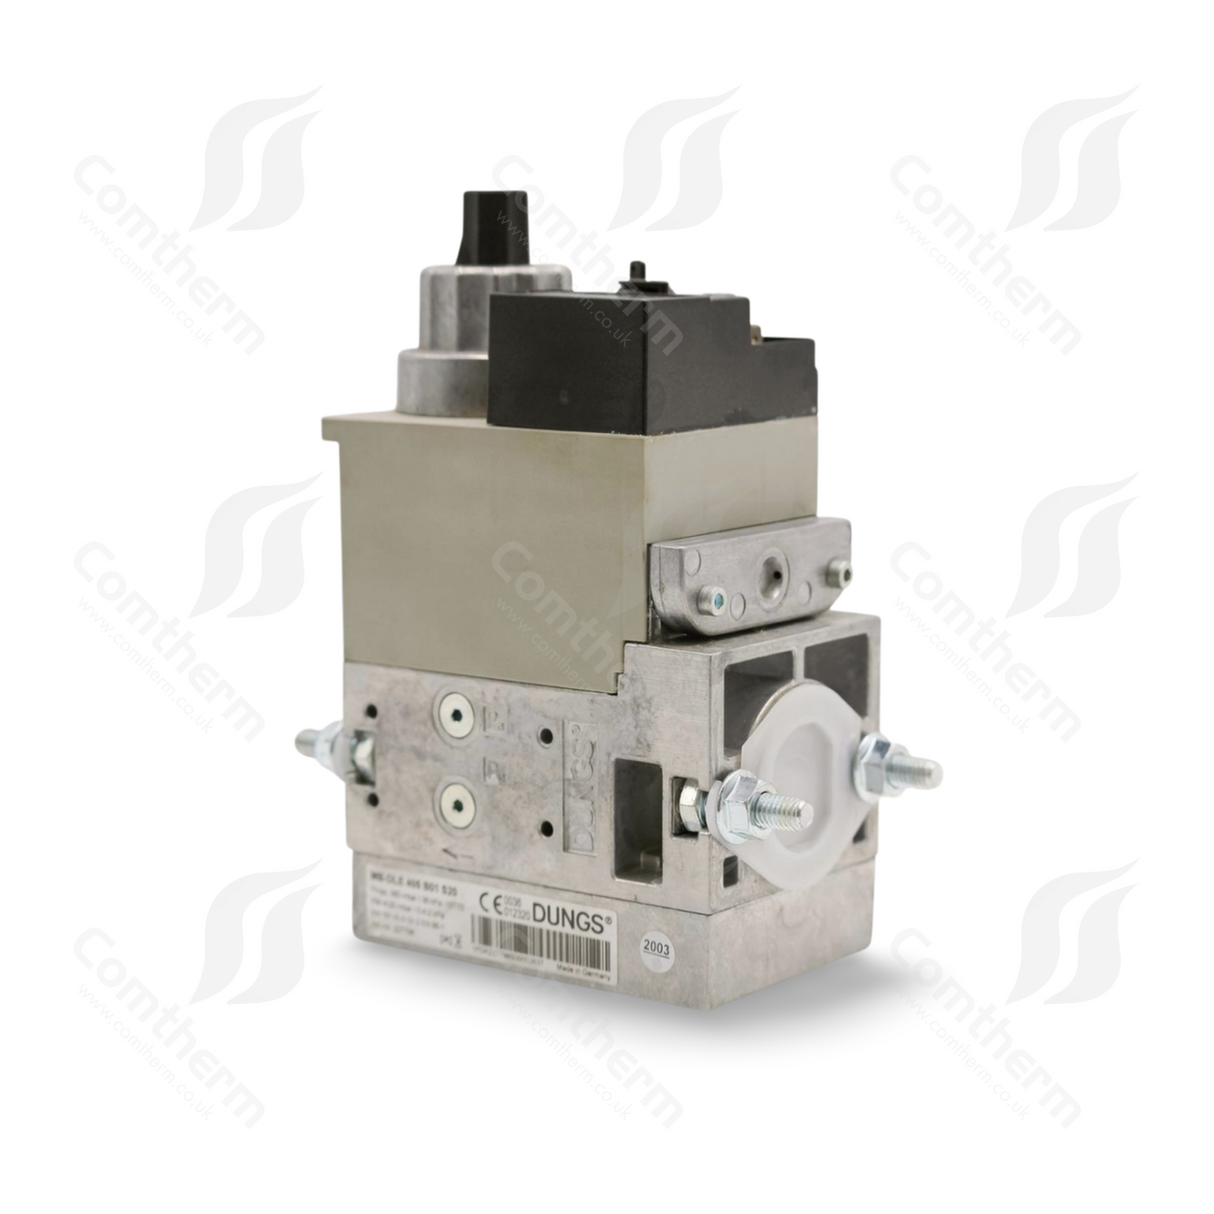 Dungs MB-DLE 412 B07 S22 Multibloc Gas Valve - 110v